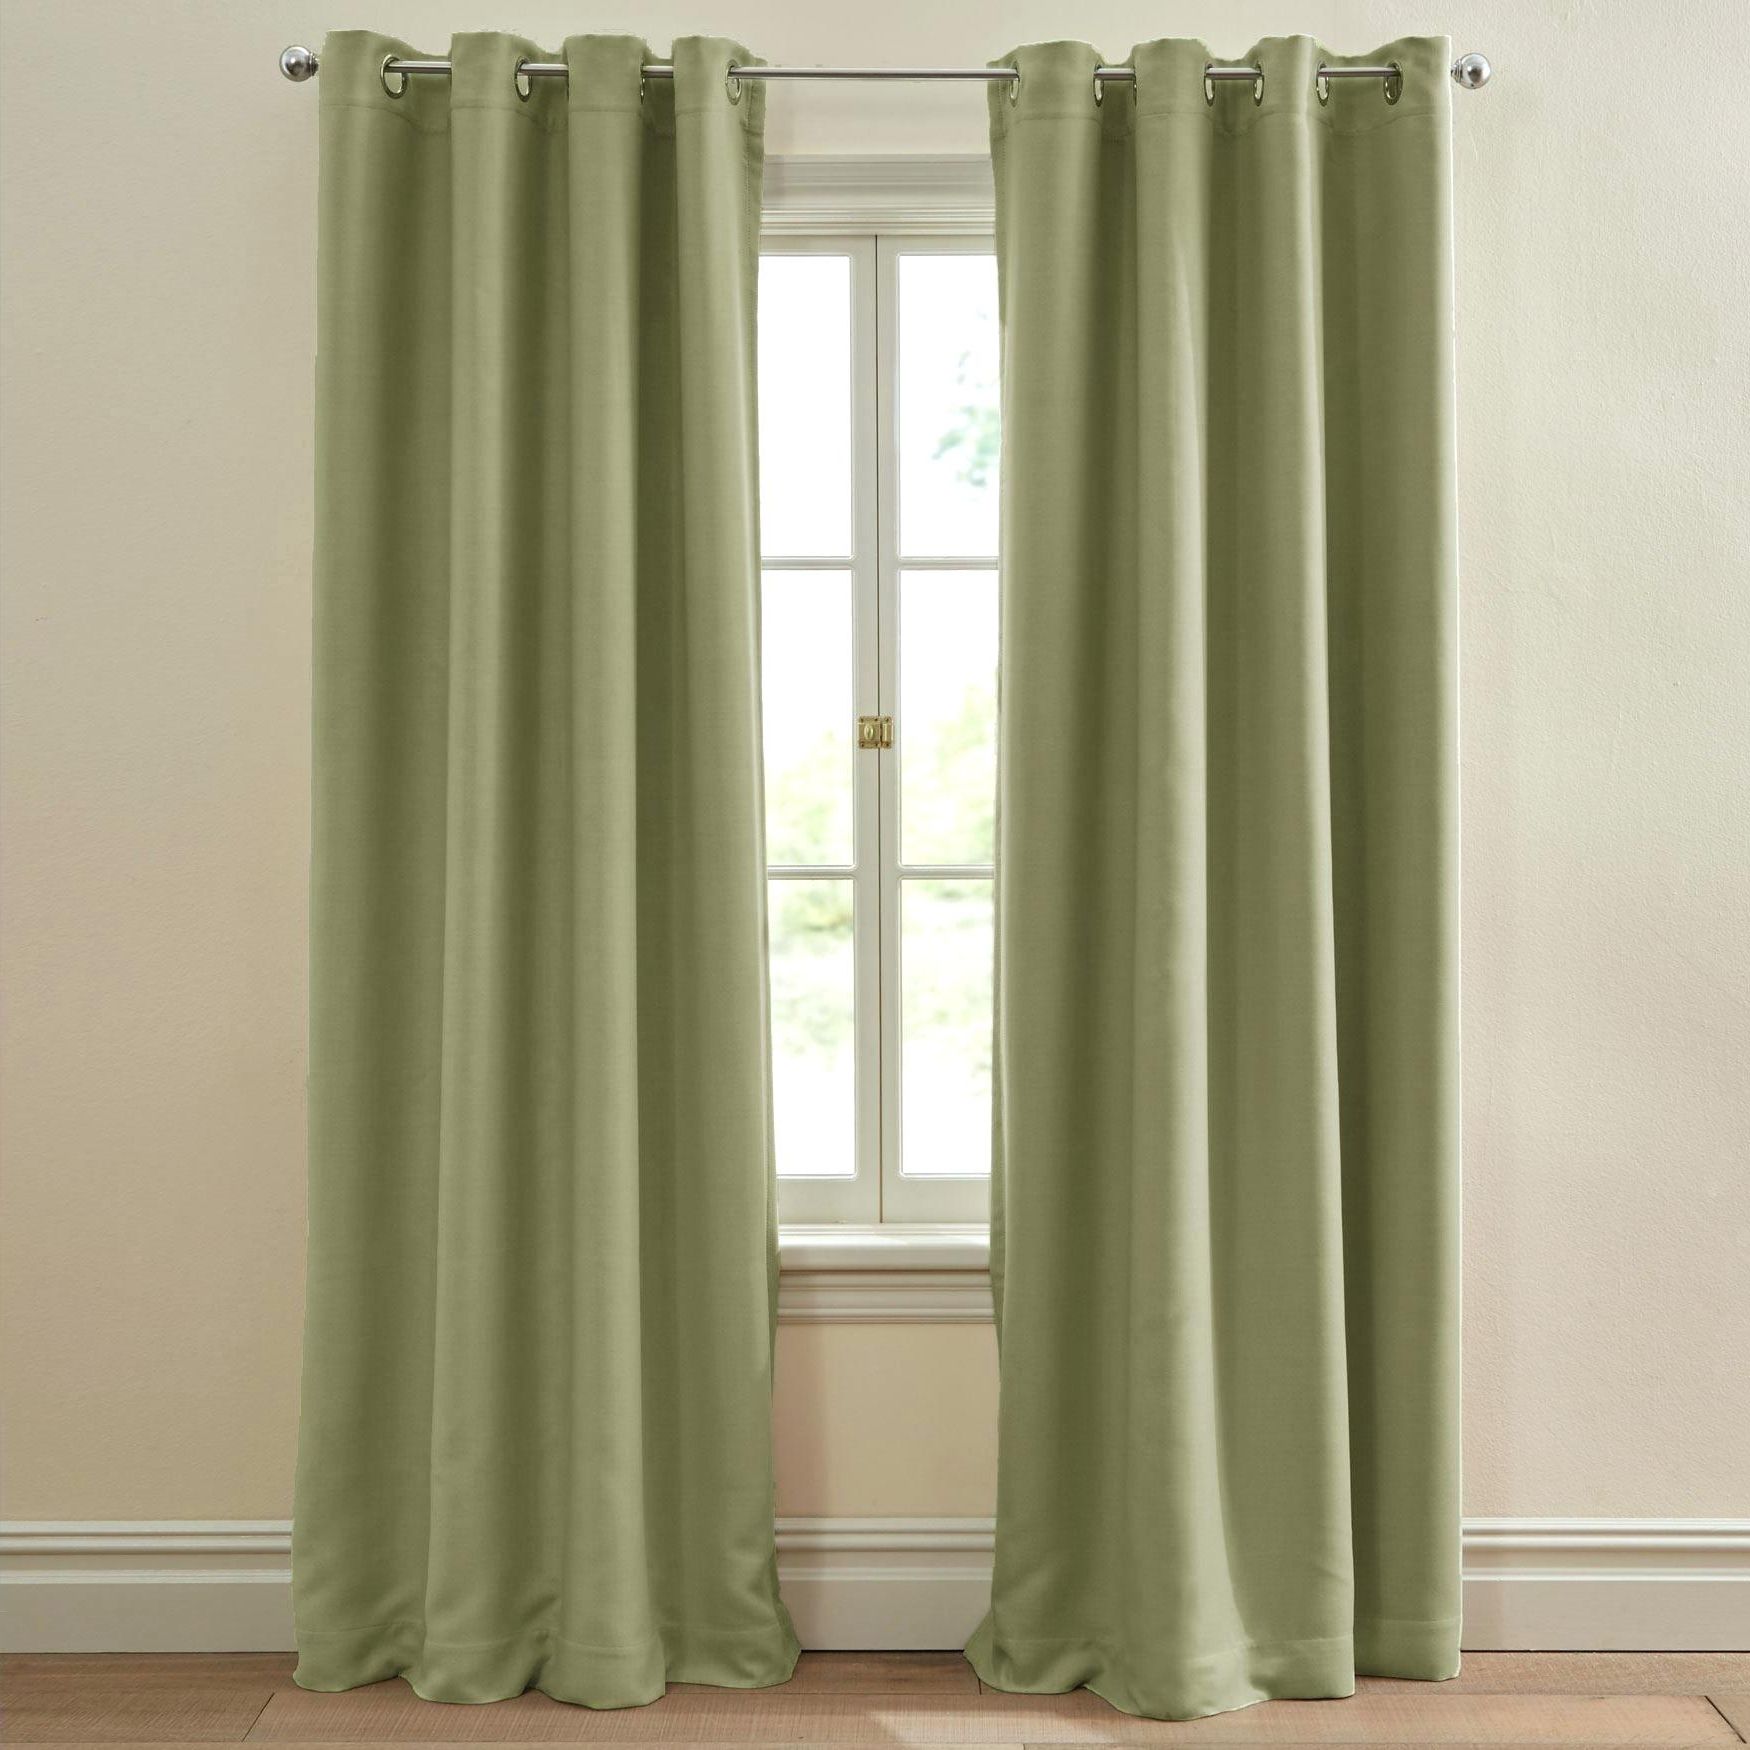 2021 Ultimate Blackout Short Length Grommet Curtain Panels Pertaining To Gromet Panel Curtains – Bshteam (View 19 of 20)